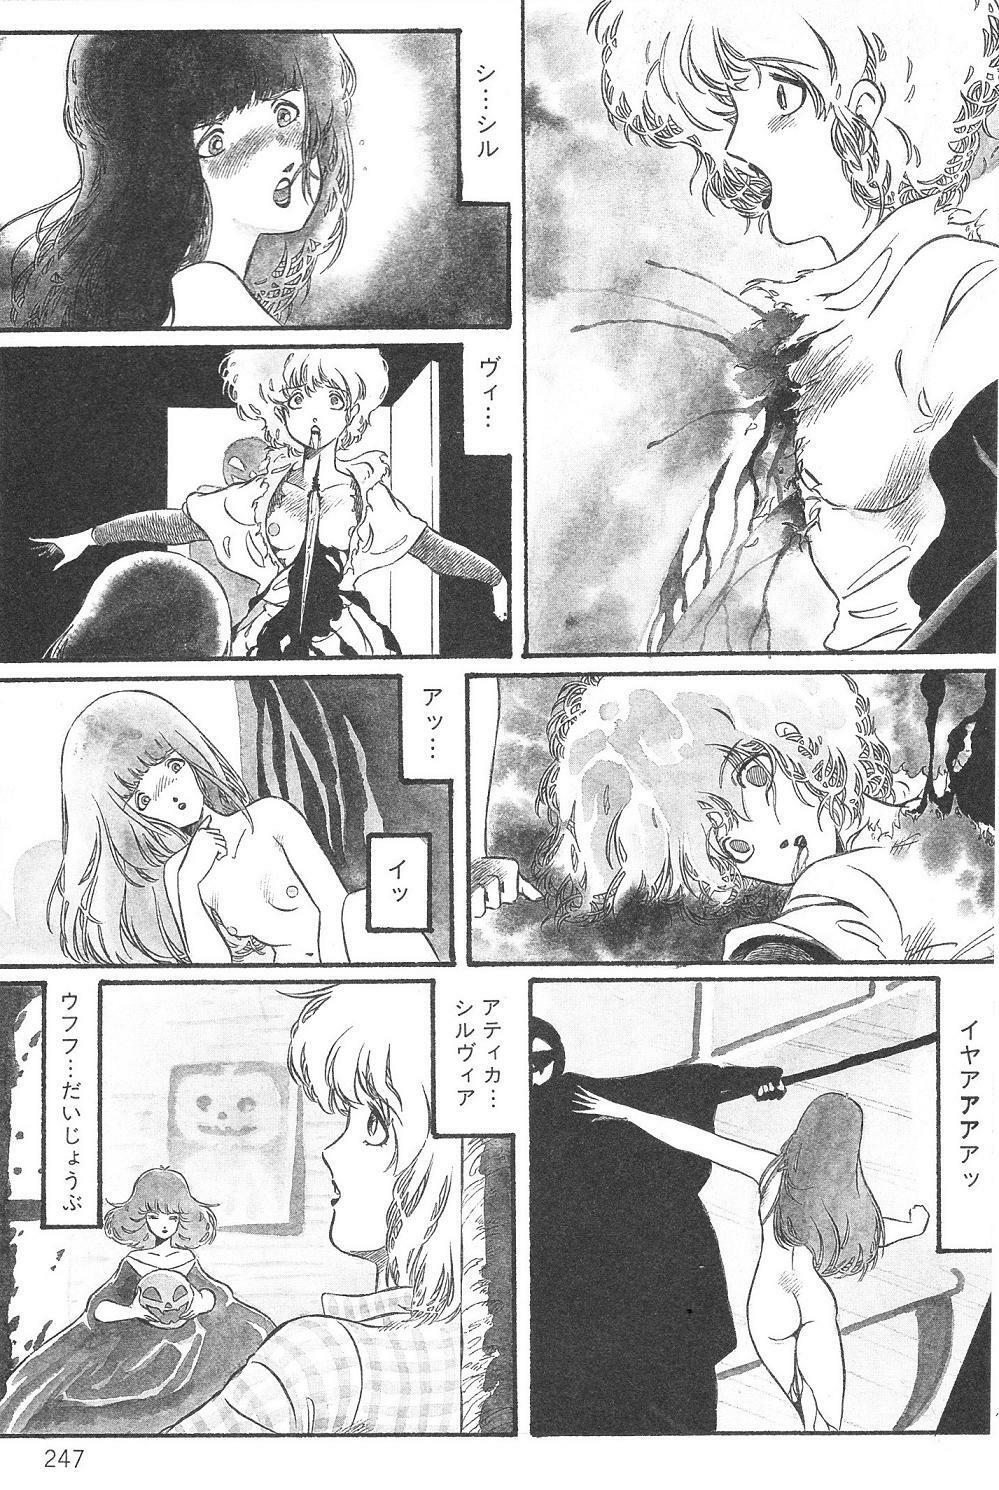 Aran-Rei THE TOWN OF HELLOWEEN page 13 full